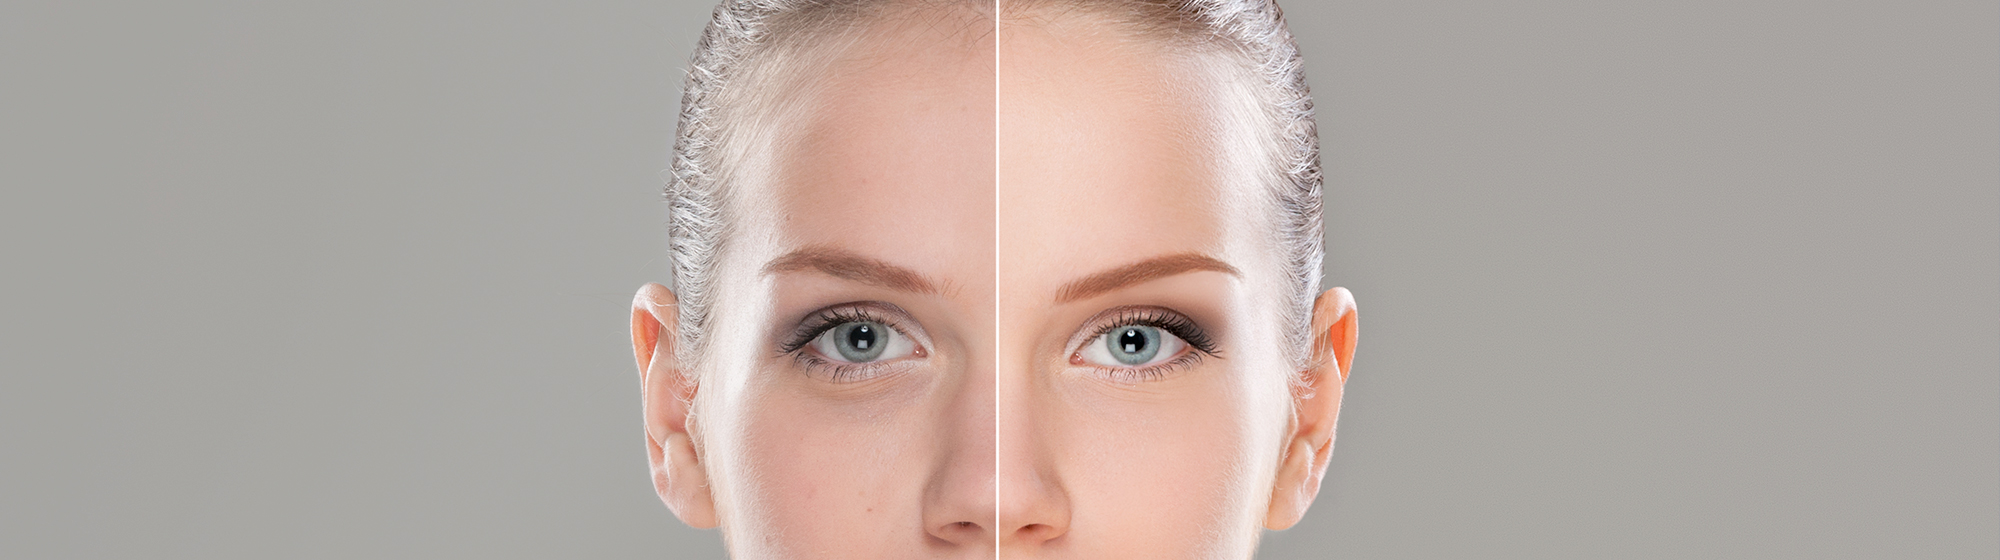 Laser Treatments Before & After Photos in Tampa Bay, FL